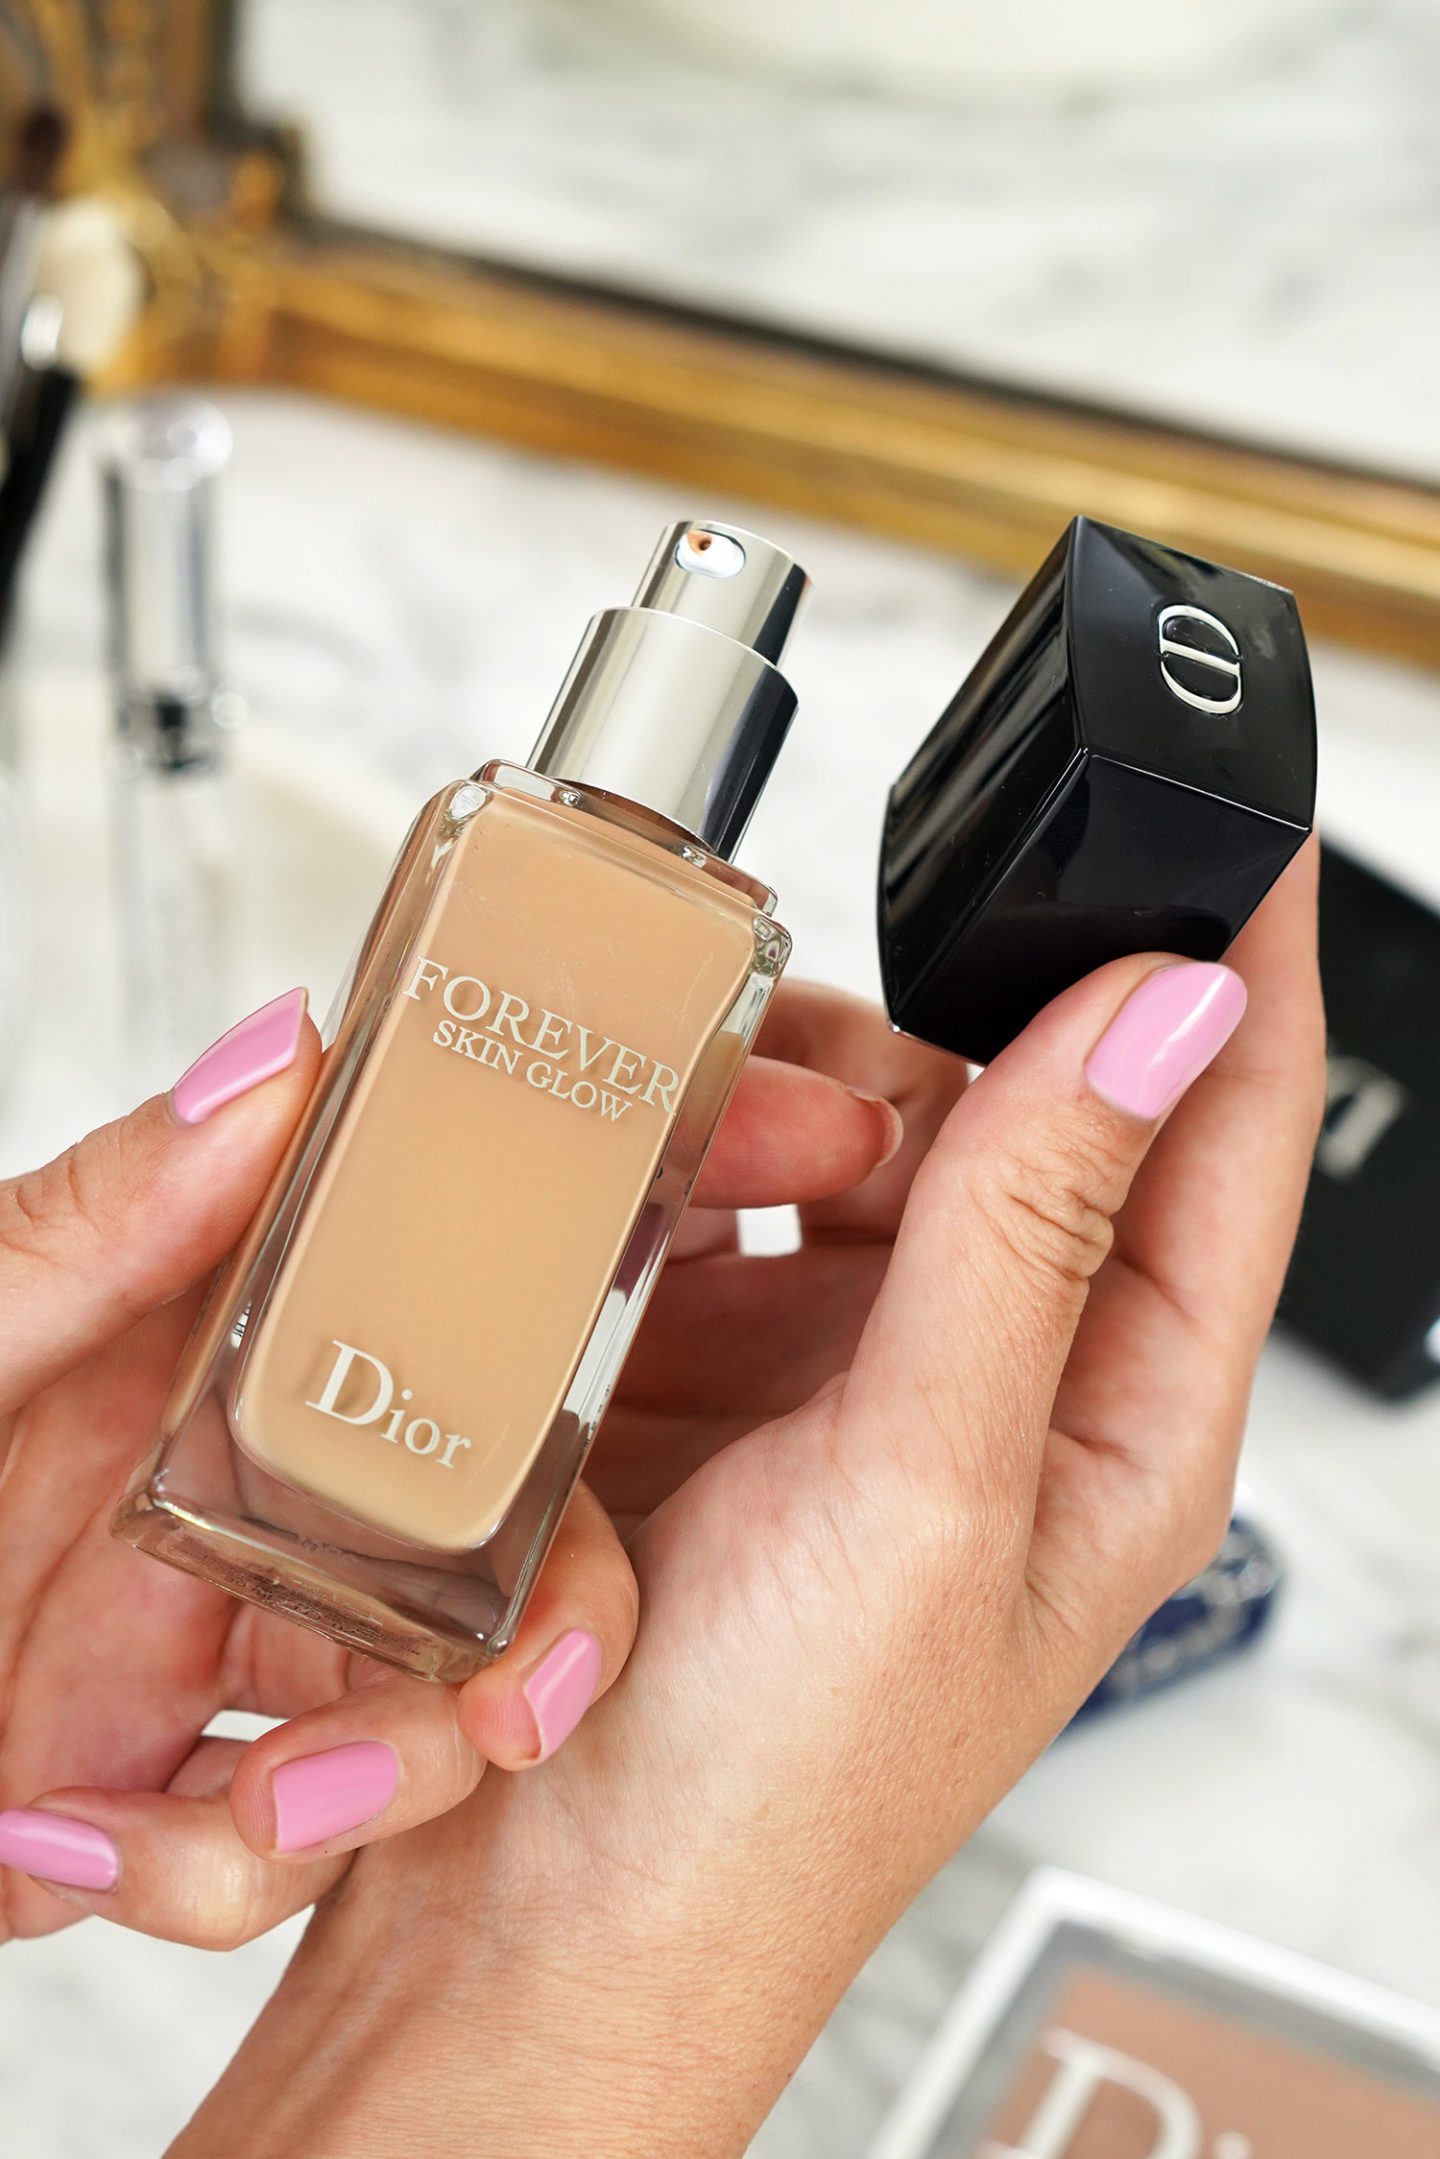 Dior Forever Skin Glow Foundation in 3N